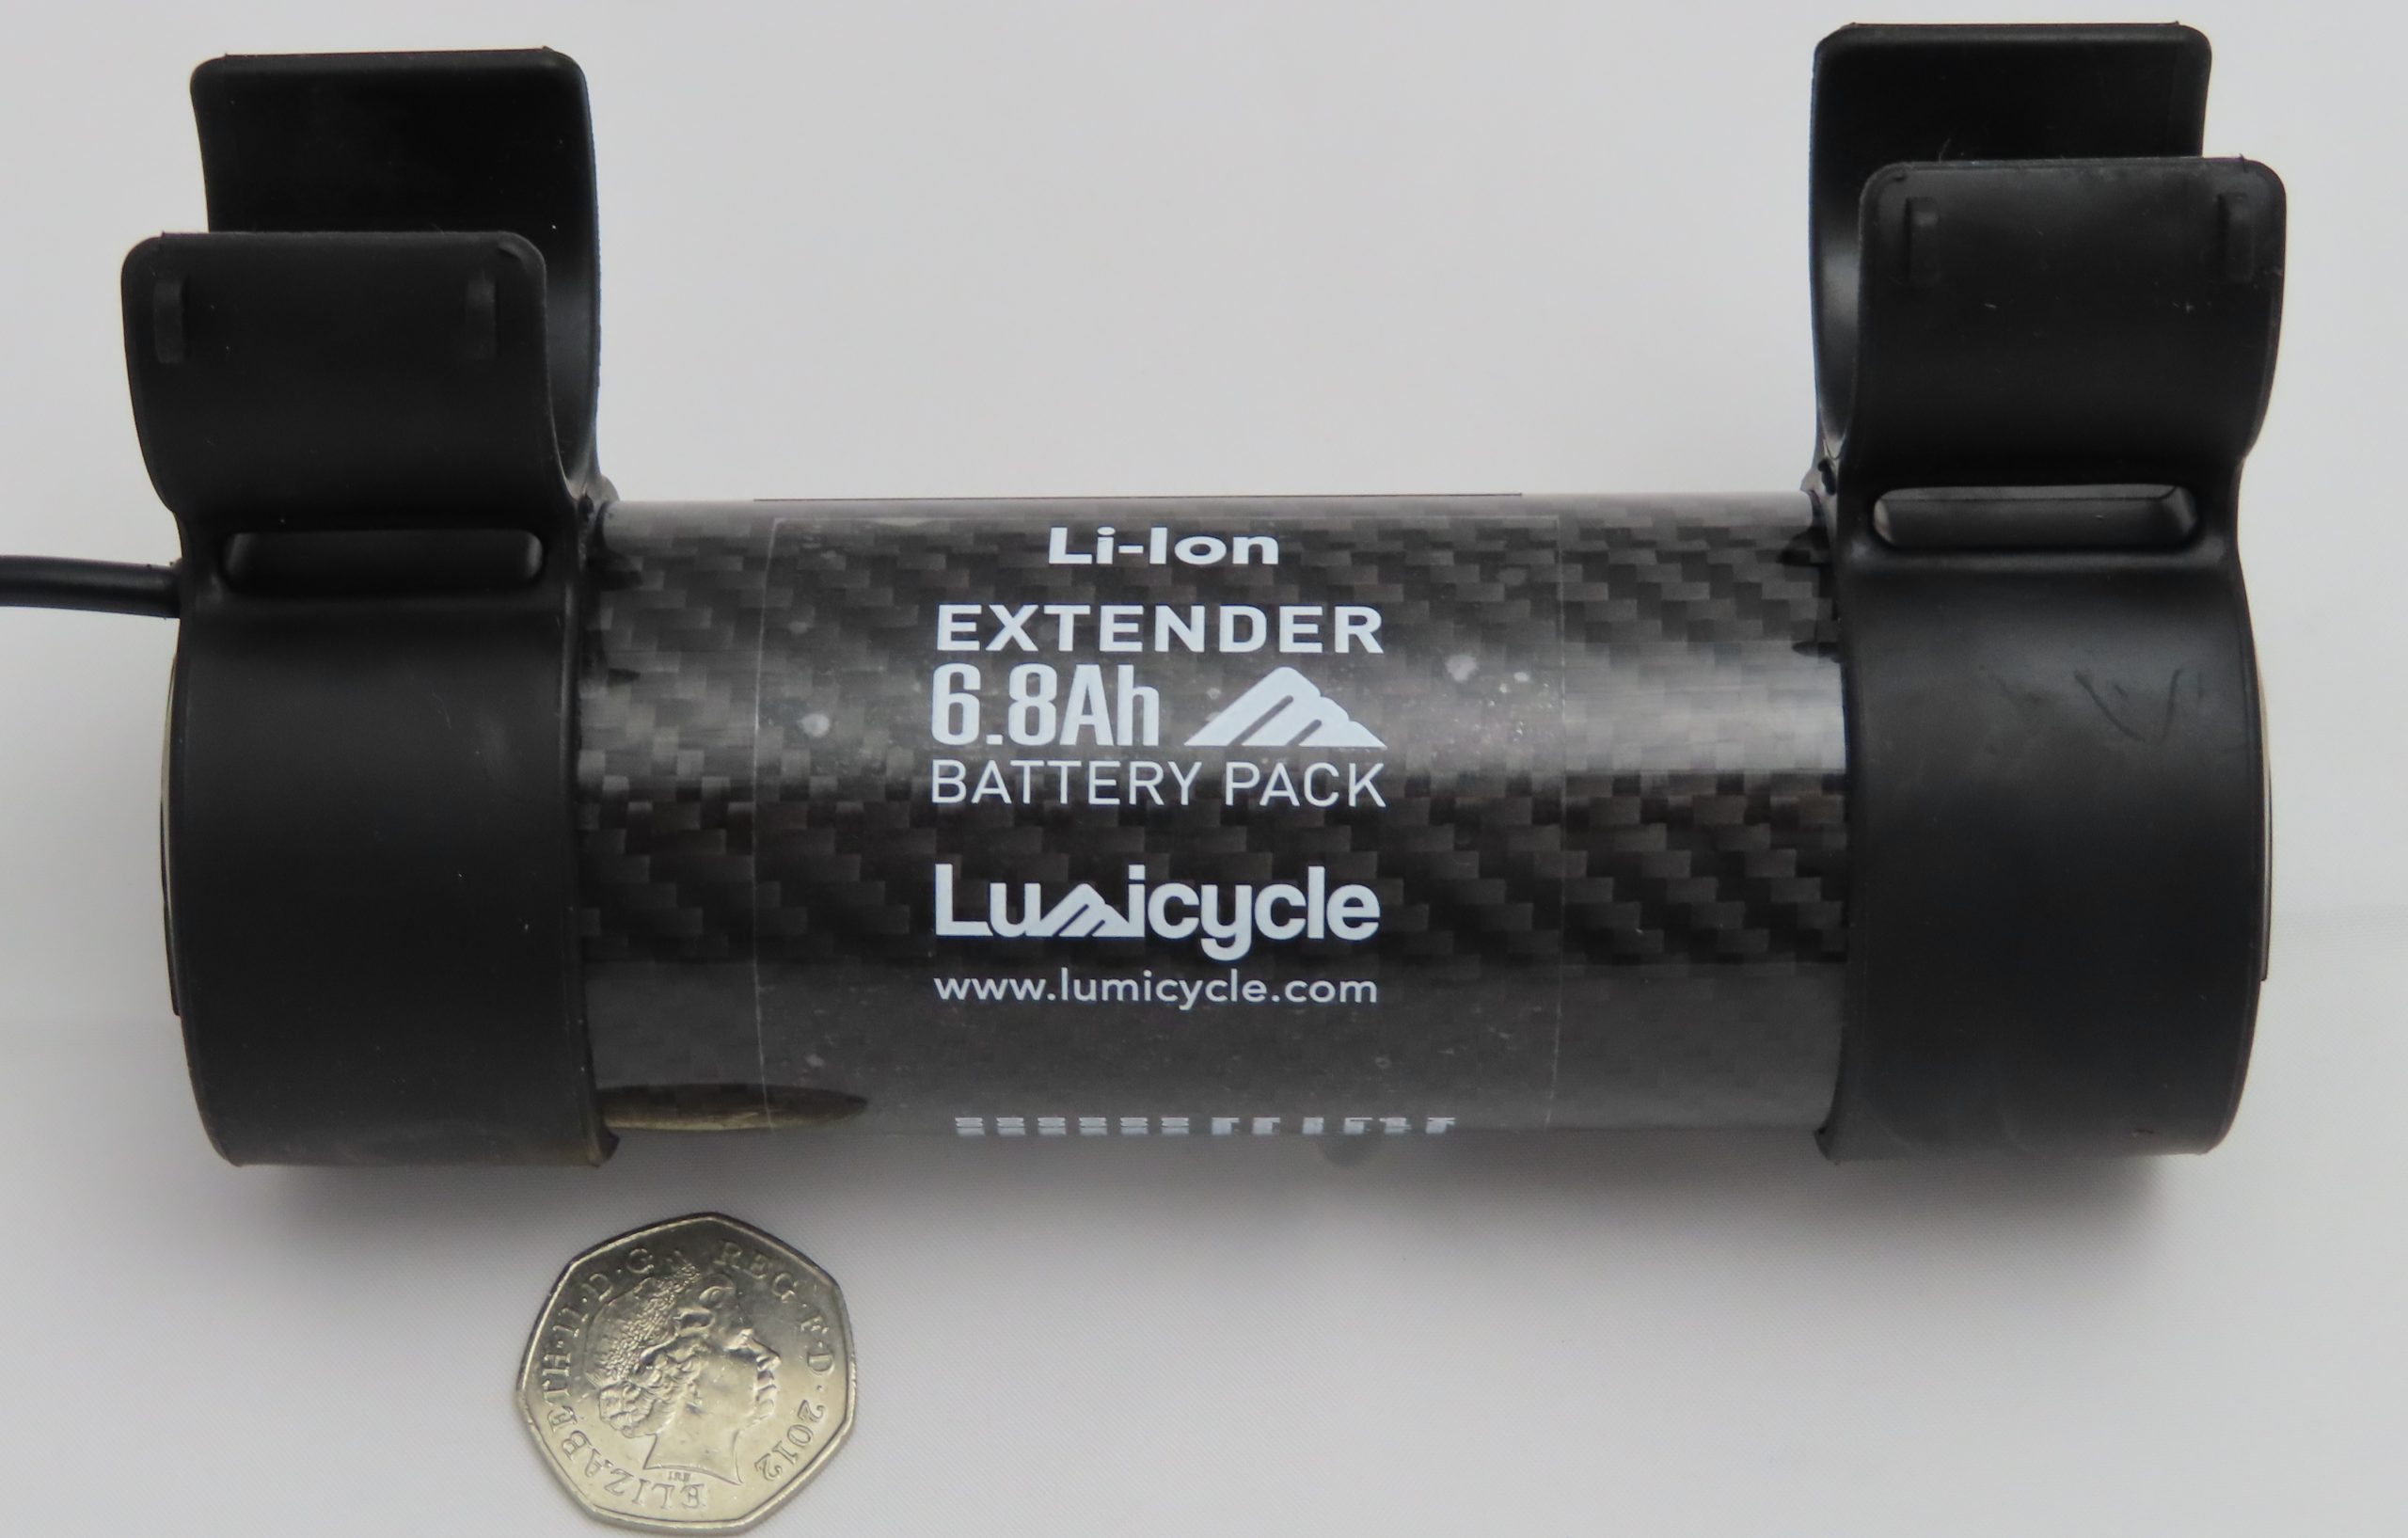 https://lumicycle.com/wp-content/uploads/2020/07/Extender-Carbon-6.8Ah-Battery-3-scaled.jpg